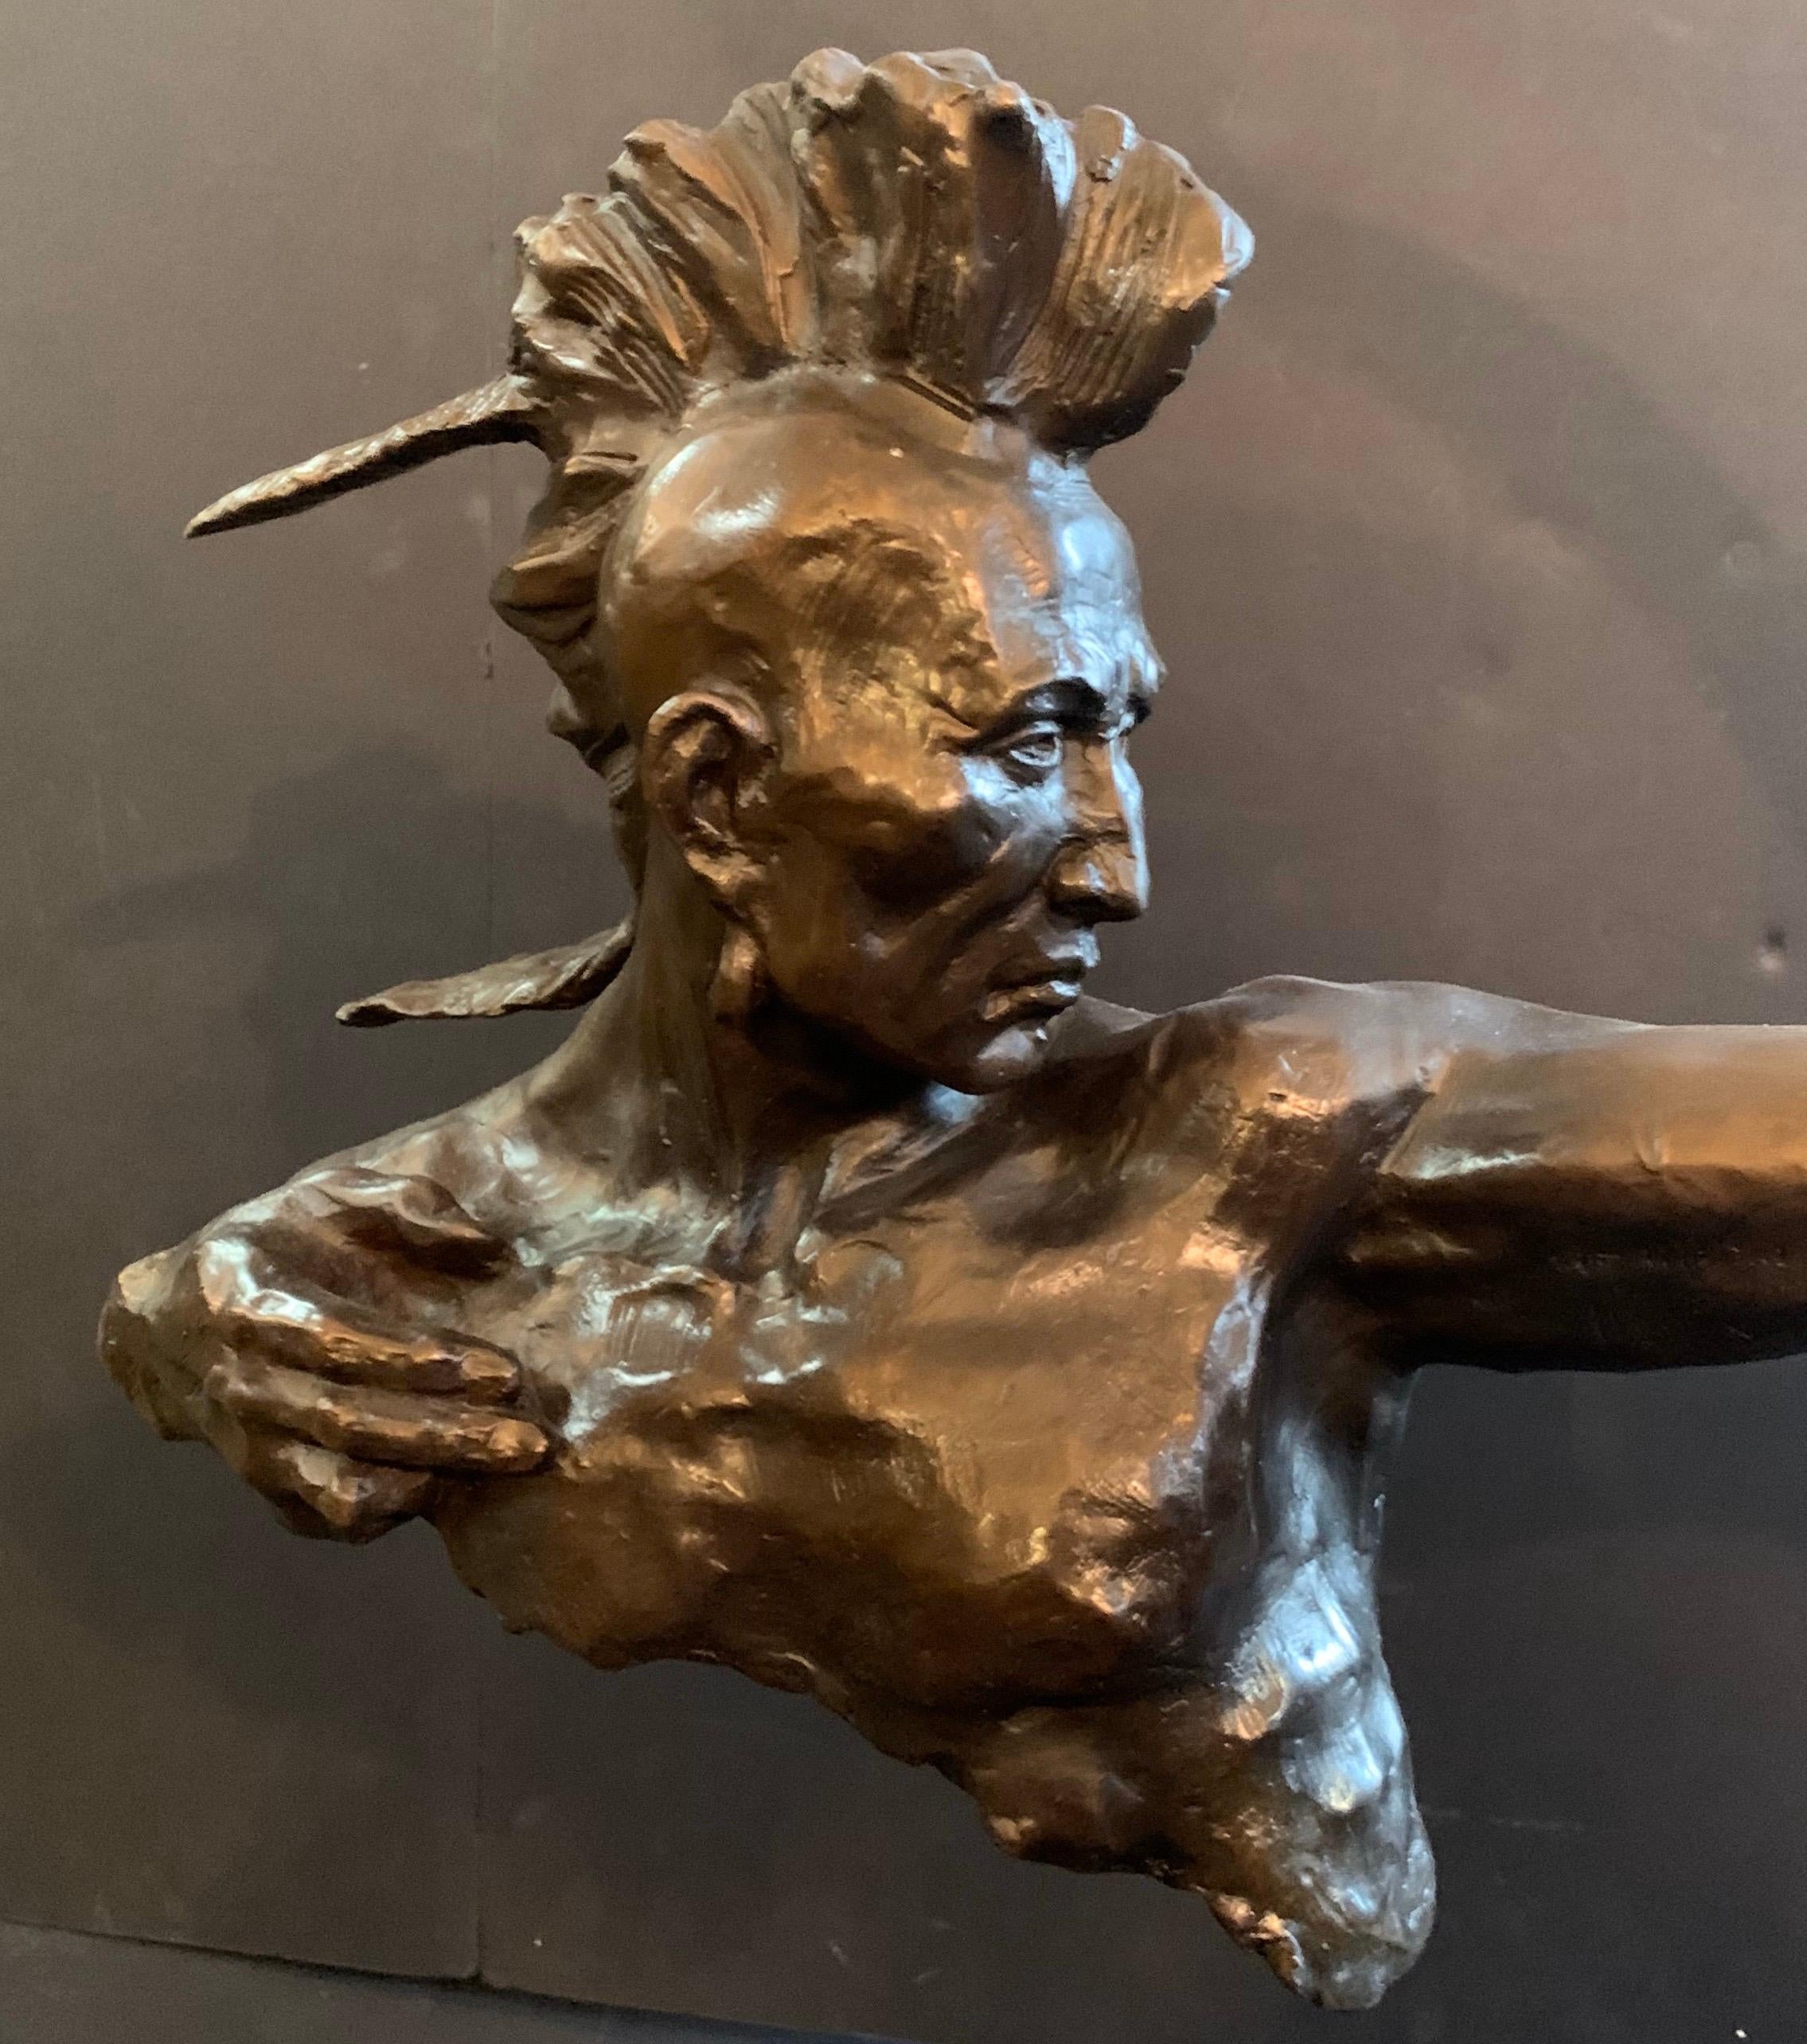 This is a stunning Art Deco stylized bronze of a Native American Indian male Archer with outstretched arm holding a bow that rests on a rectangular marble plinth. The Indian has a stern look on his face and has Mohawk styled hair. With the artist's